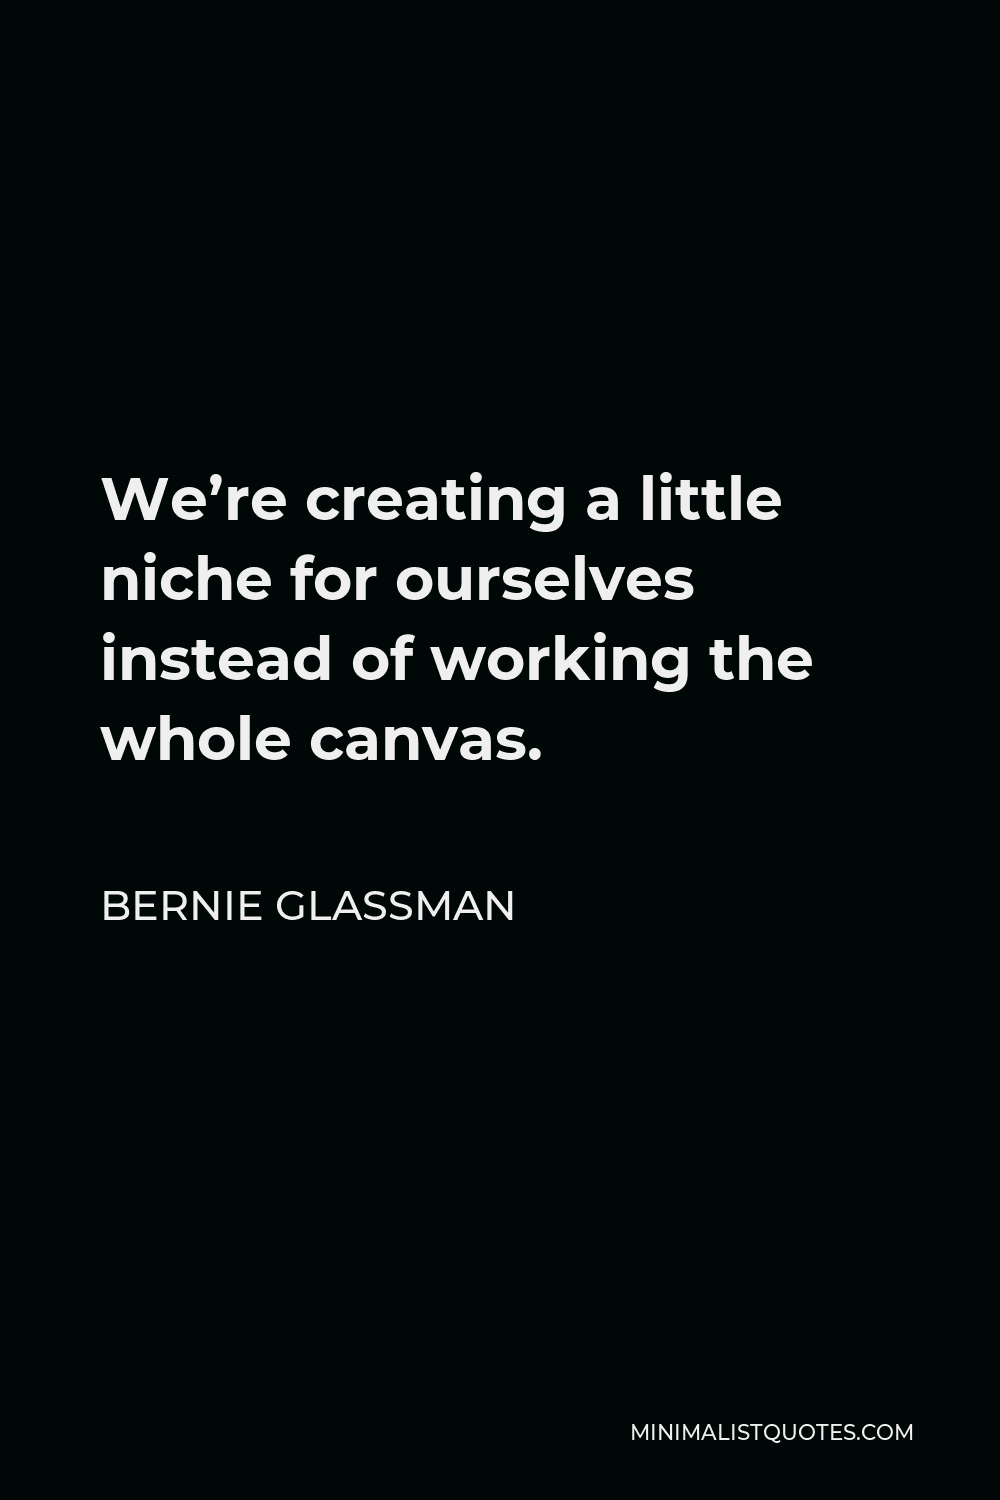 Bernie Glassman Quote - We’re creating a little niche for ourselves instead of working the whole canvas.